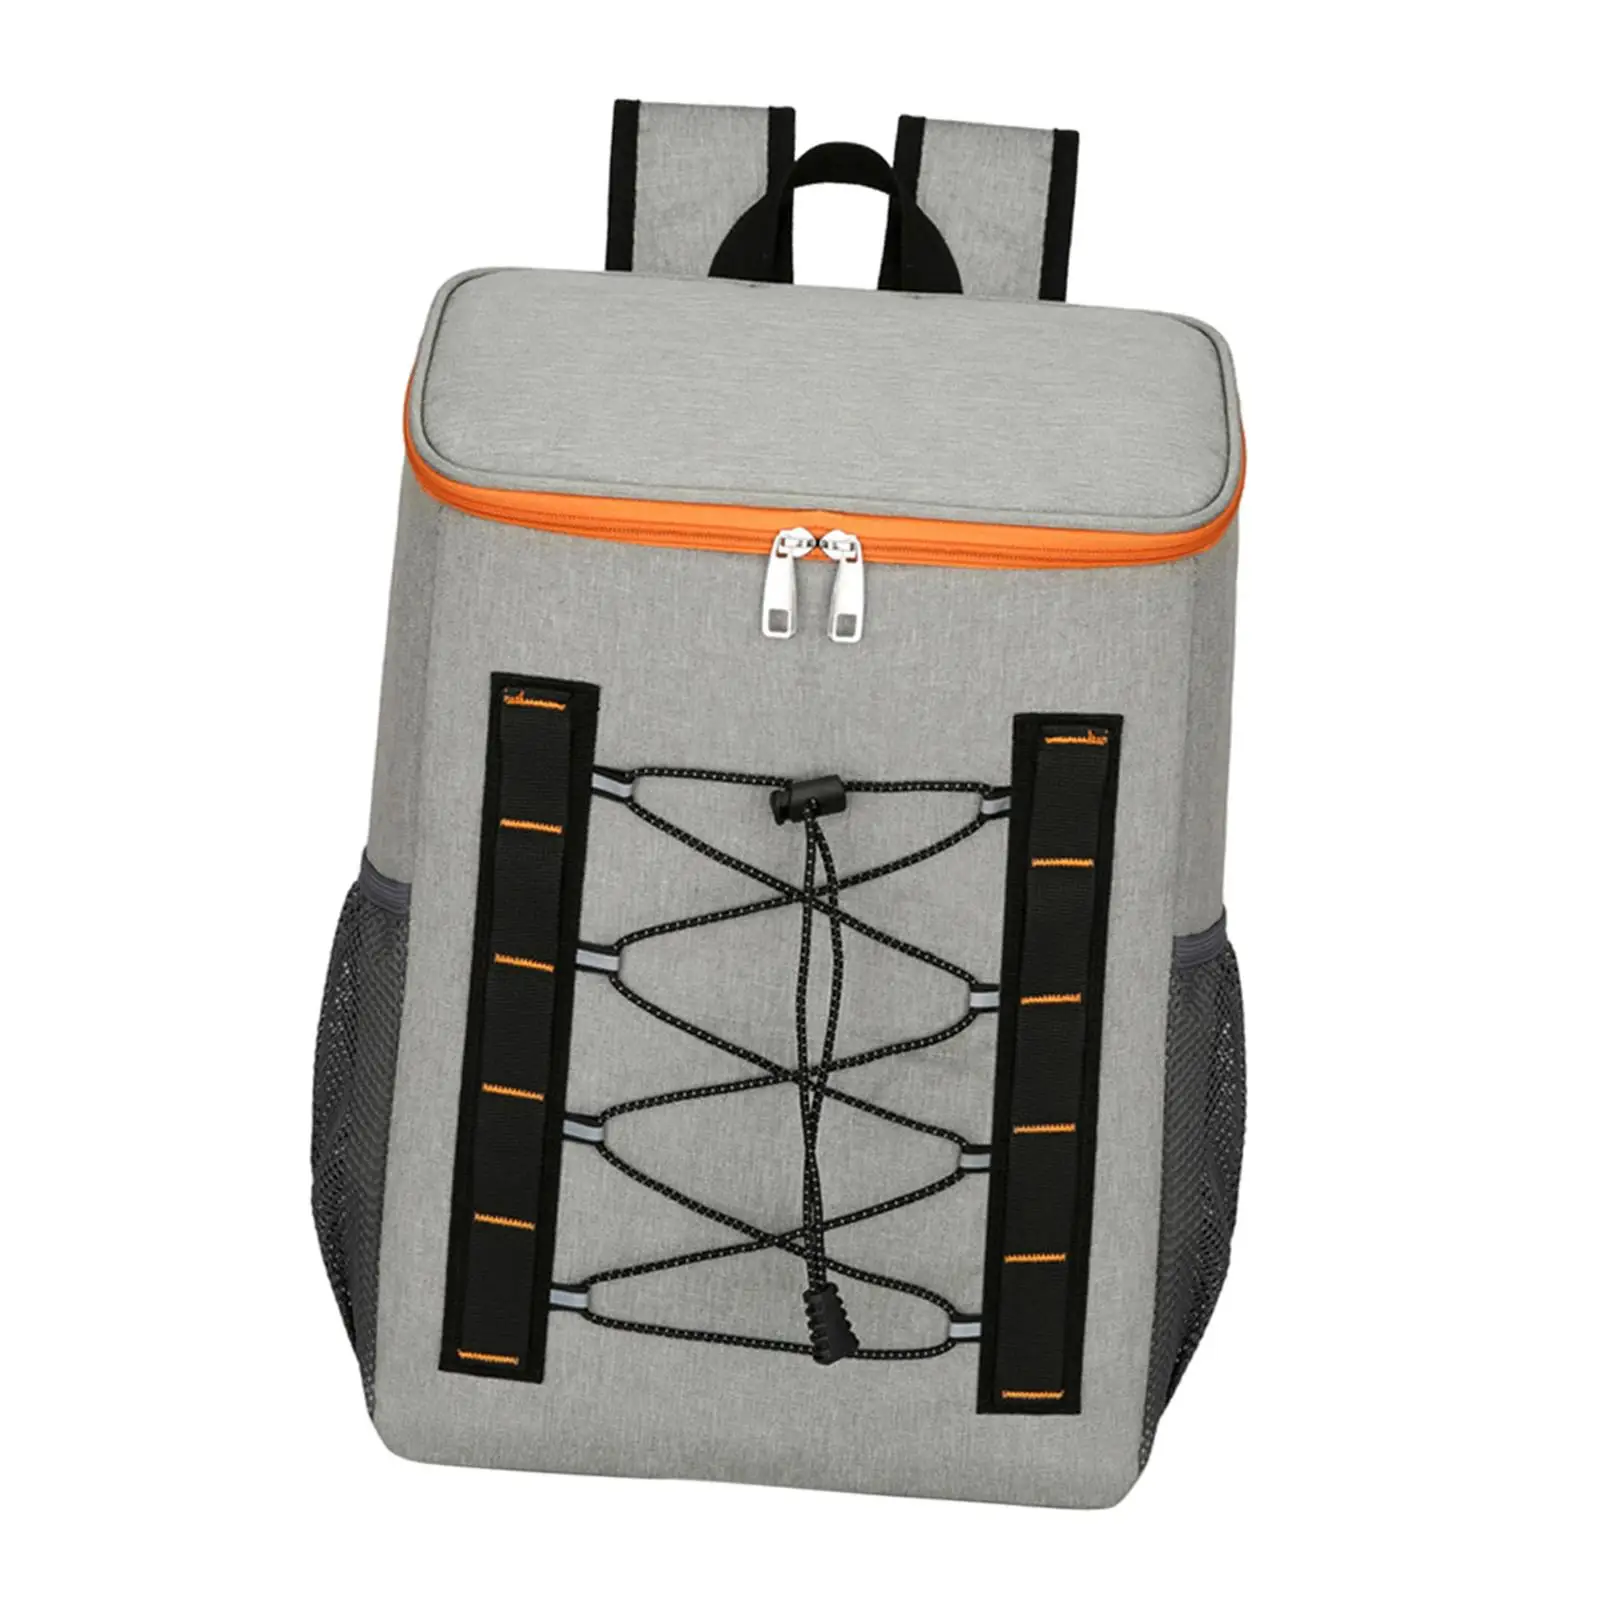 Outdoor Picnic Bag Picnic Warm Insulated Bag Multifunctional Refrigerated Backpack Large Thermal Bag for Travel Beach Lunch